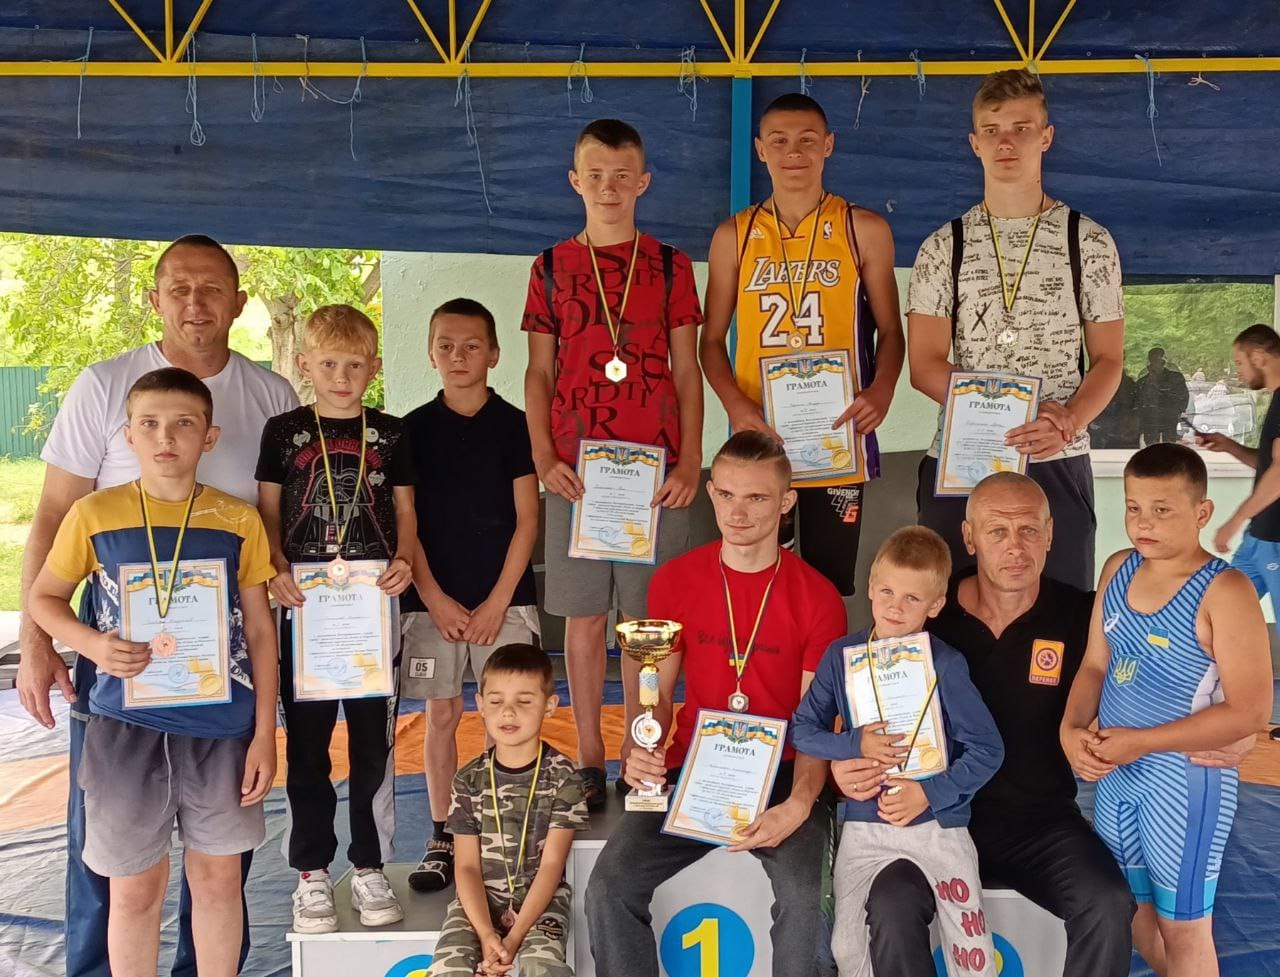 Community Head together with the winners of the Greco-Roman wrestling tournament 